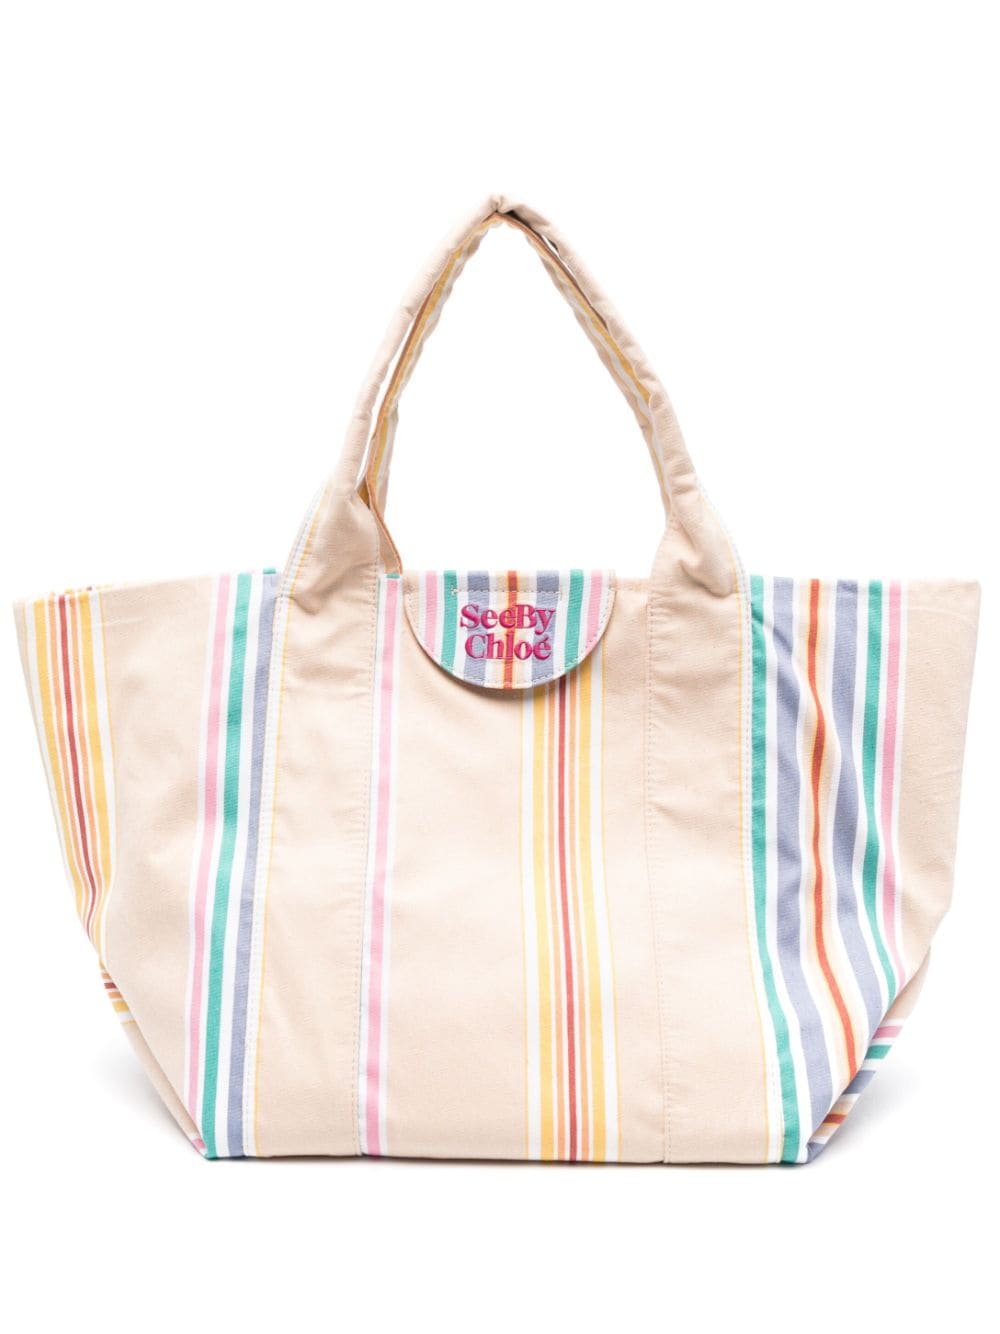 See by Chloé striped cotton tote bag - Neutrals von See by Chloé